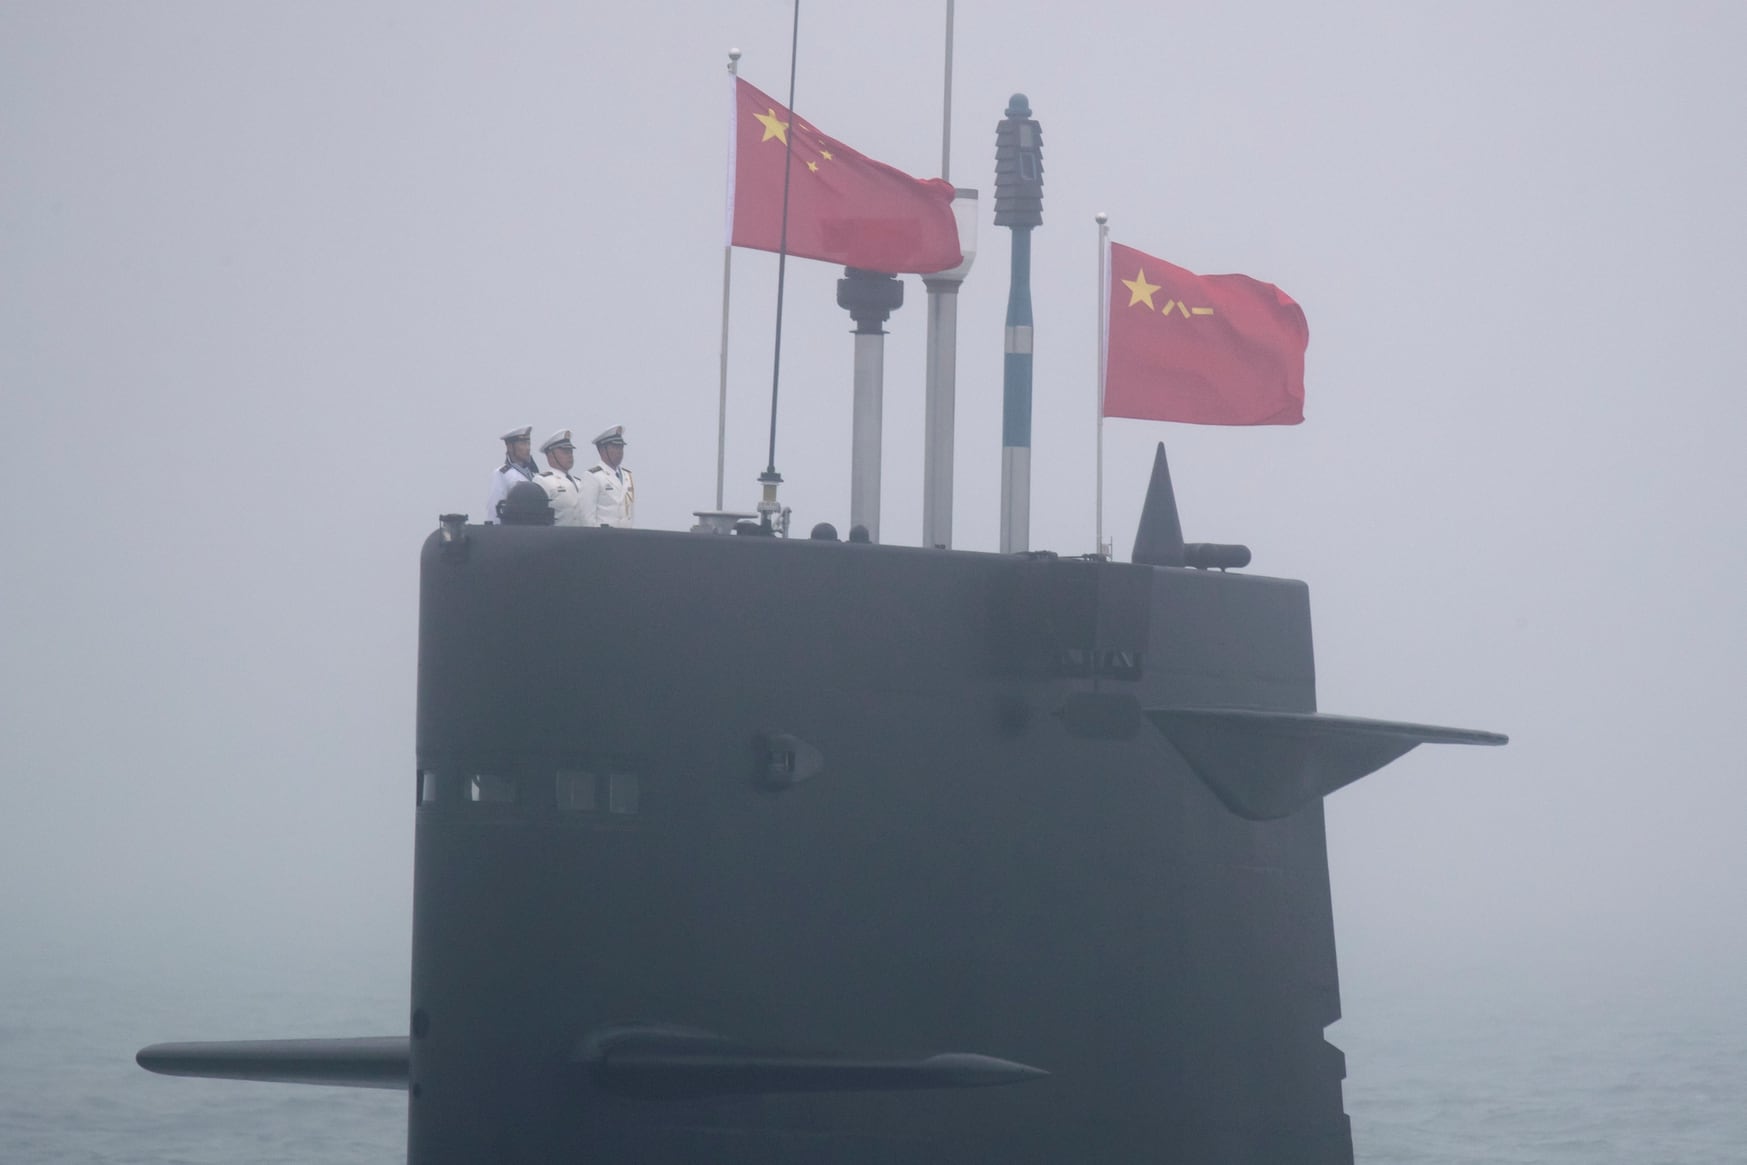 A Great Wall 236 submarine of the Chinese People's Liberation Army Navy, billed by Chinese state media as a new type of conventional submarine, is shown in April 2019. (Mark Schiefelbein/AFP via Getty Images)